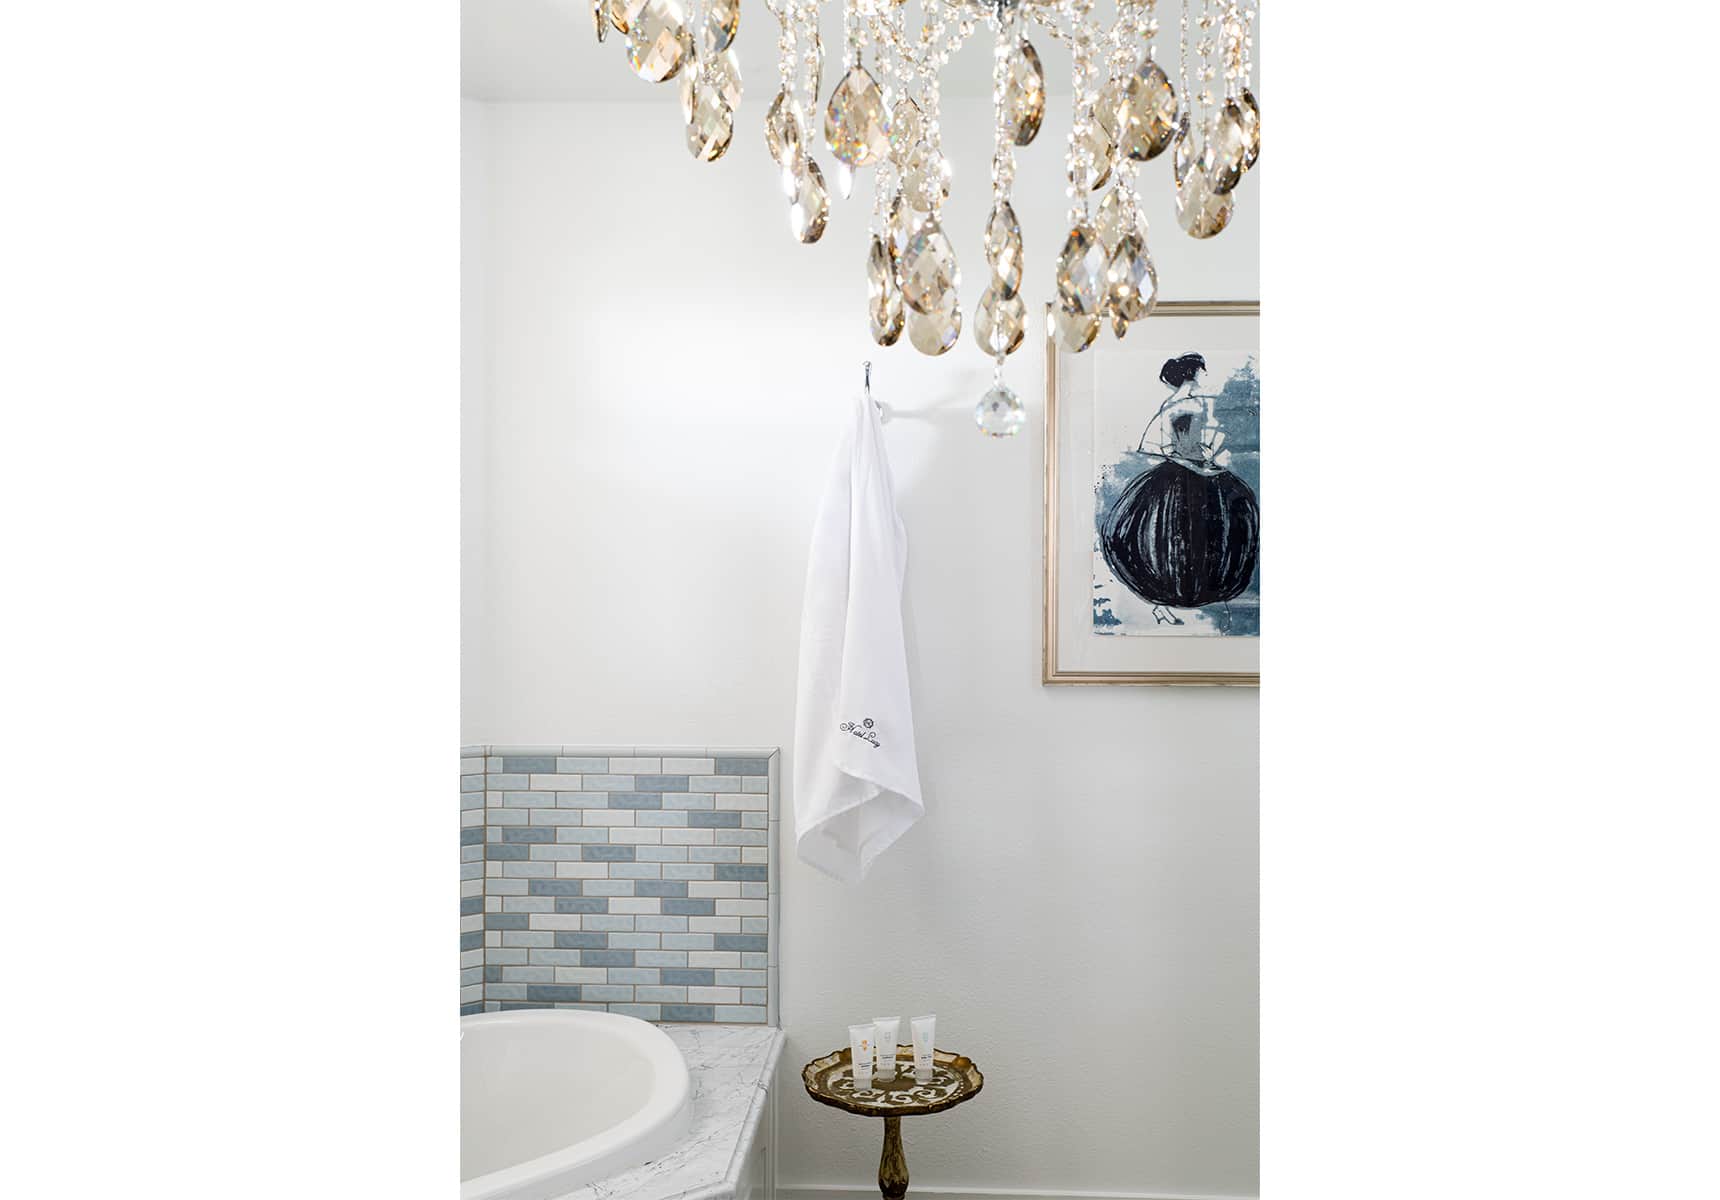 Chandelier in a bathroom with a tub